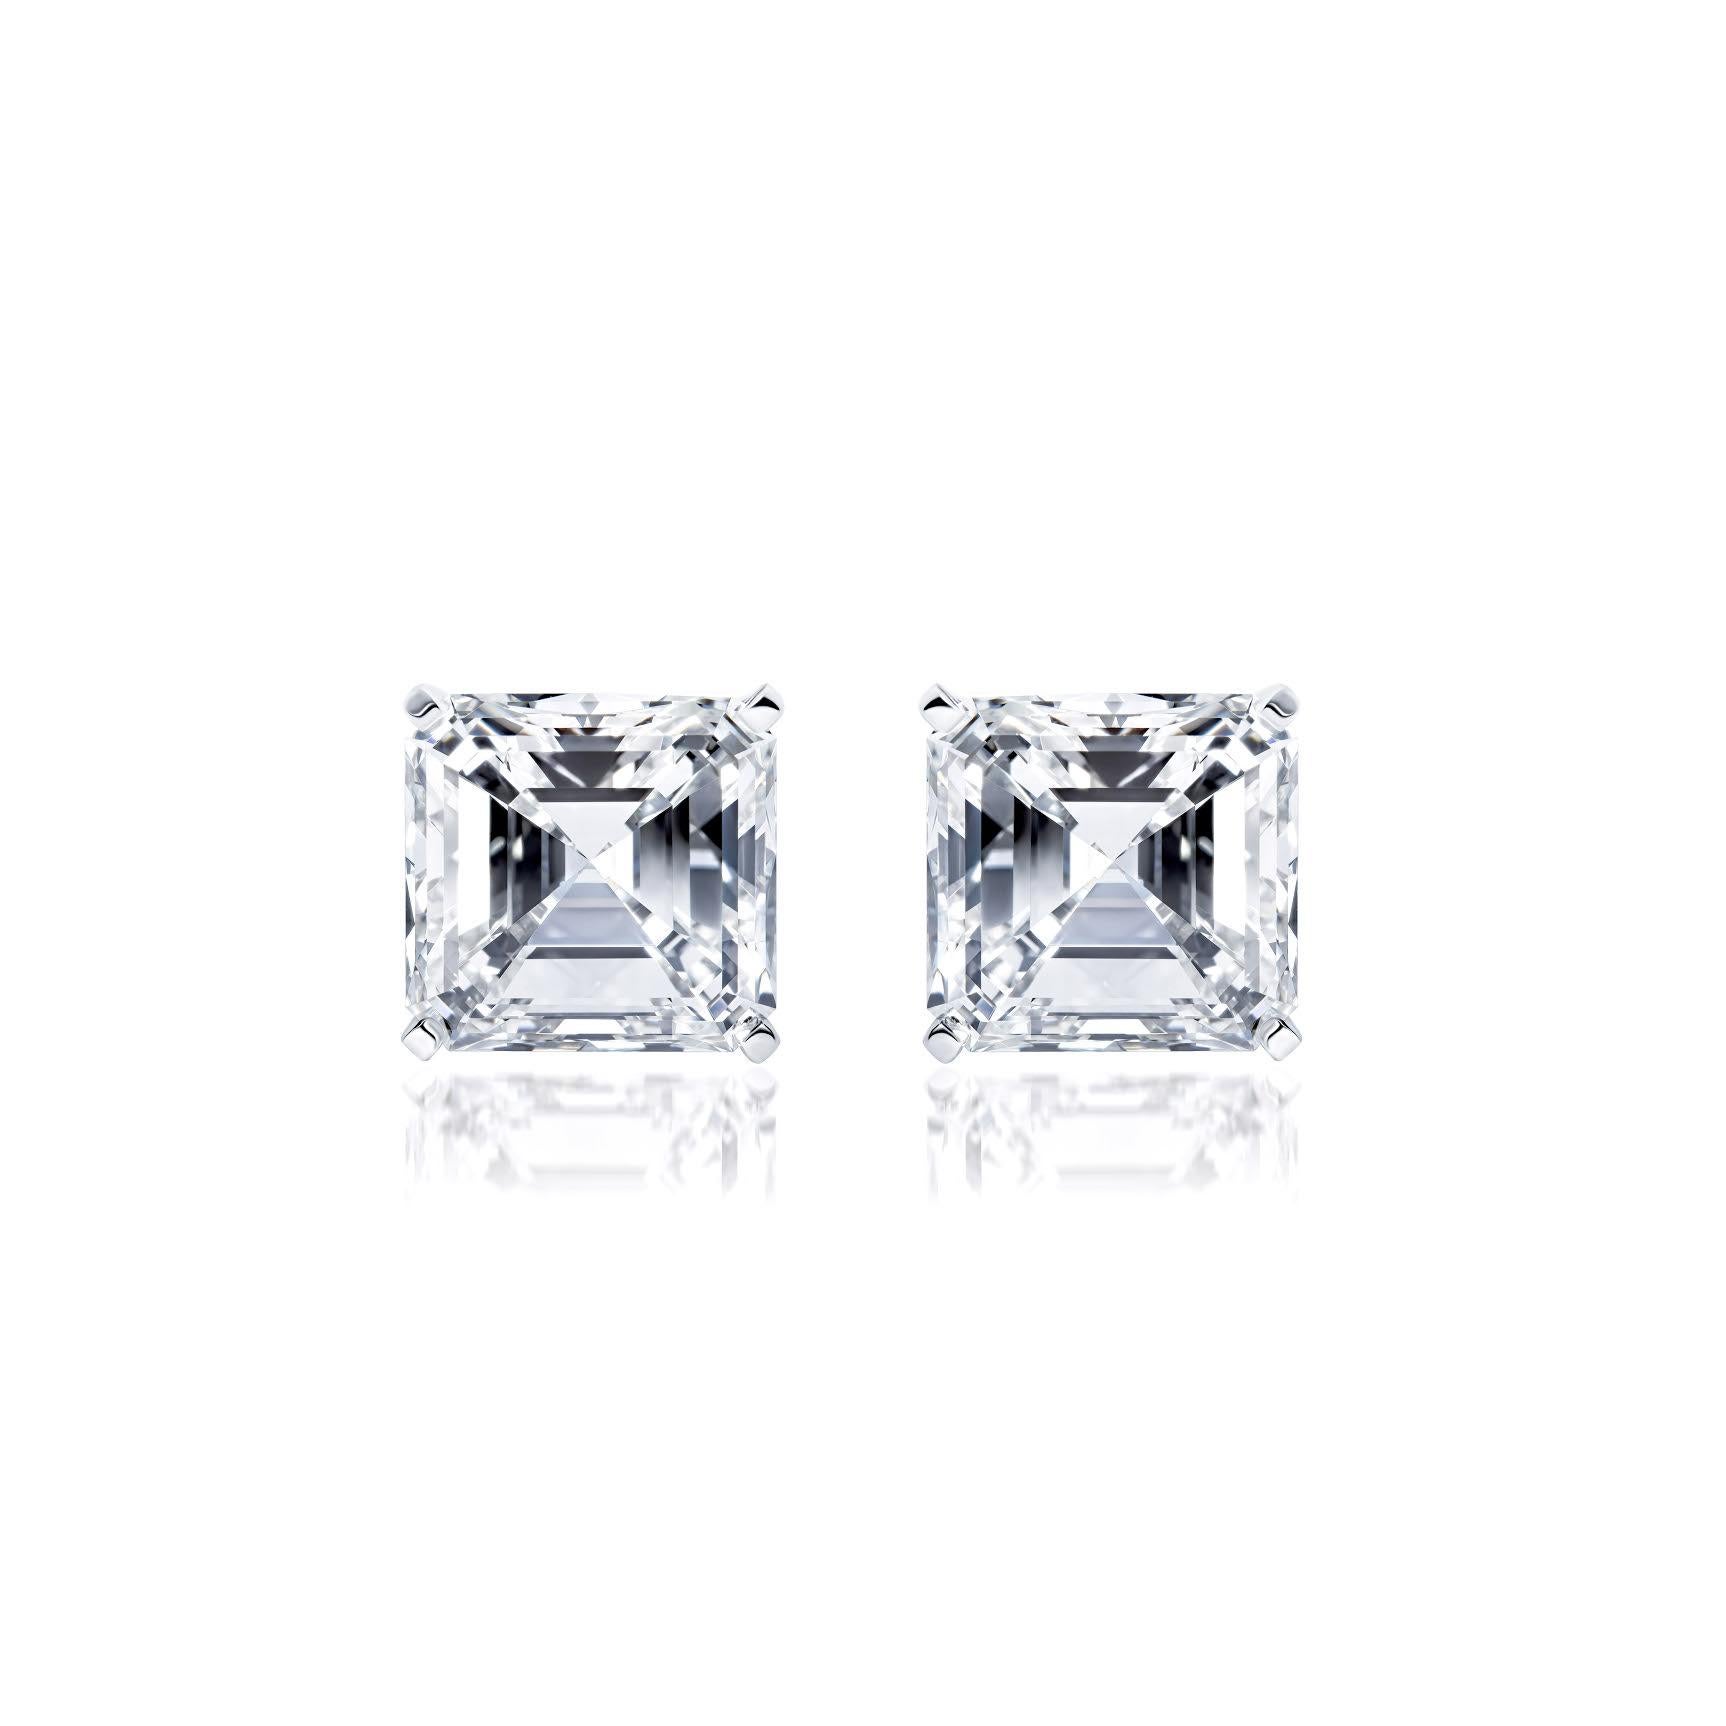 Sophisticated elegance with an edge from the vault of ISSAC NUSSBAUM NEW YORK

These extraordinary Diamonds  weight in at over 5 1/2 carats each! for a total combined  carat weight of 11.53  
Asccher cut diamonds of this quality are rare, a